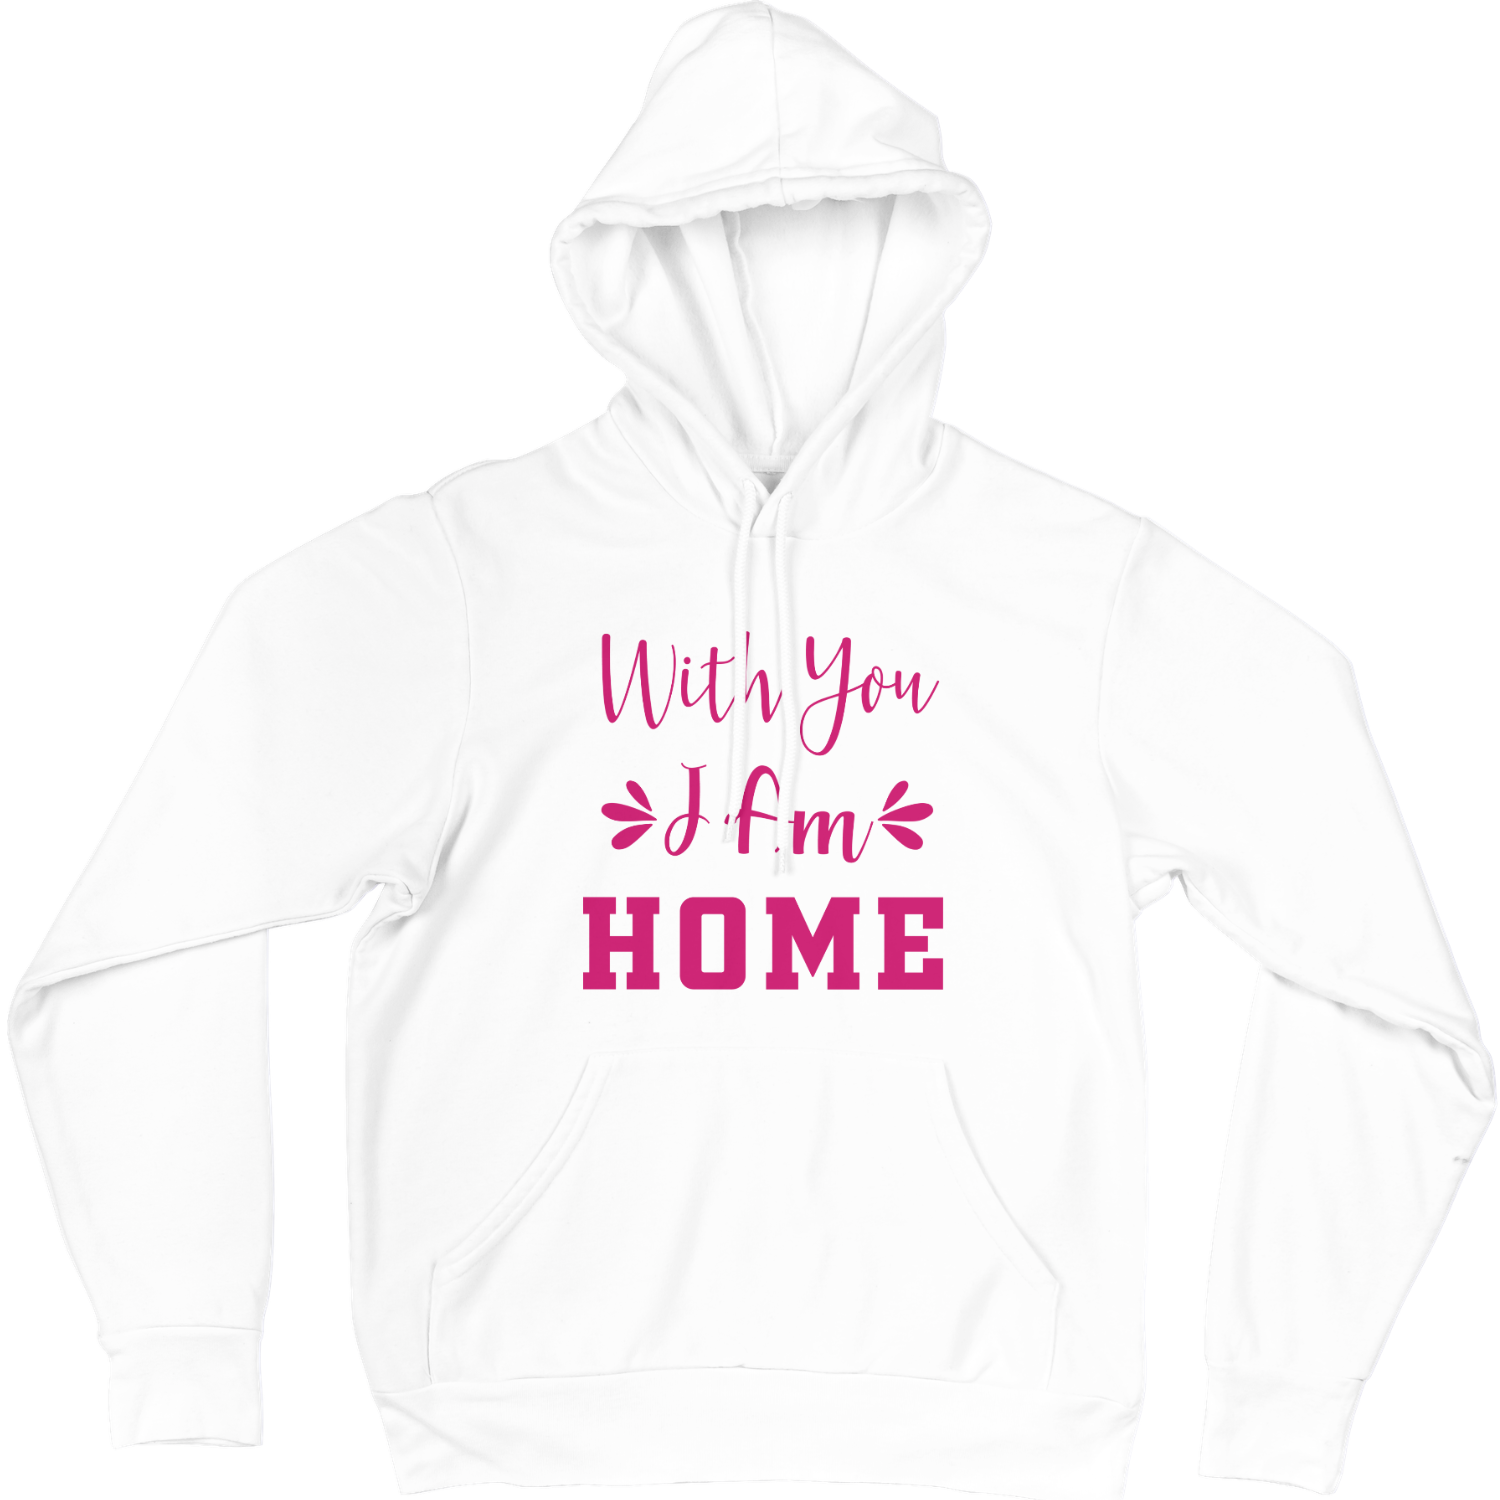 With you i am home SVG | Digital Download | Cut File | SVG Only The Sweet Stuff